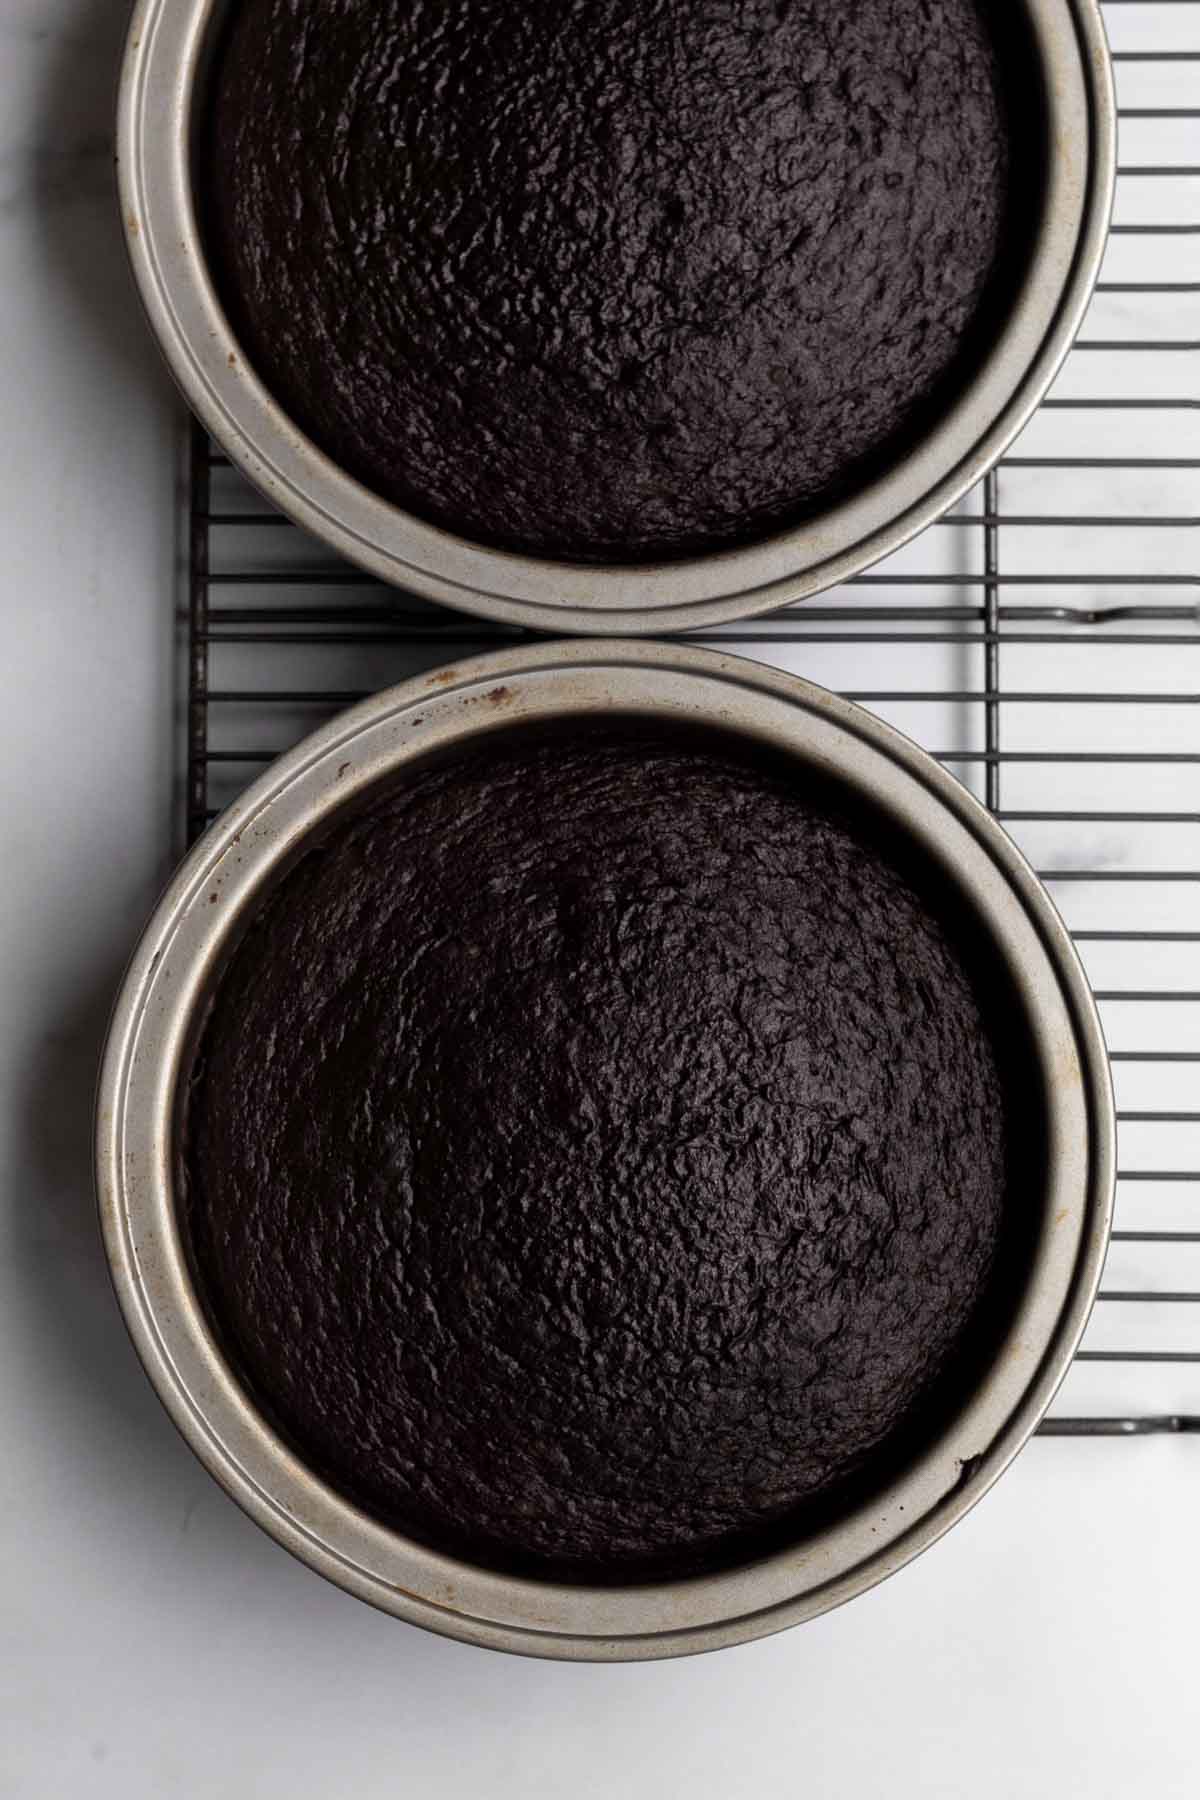 Baked chocolate cake bread in cake pans.